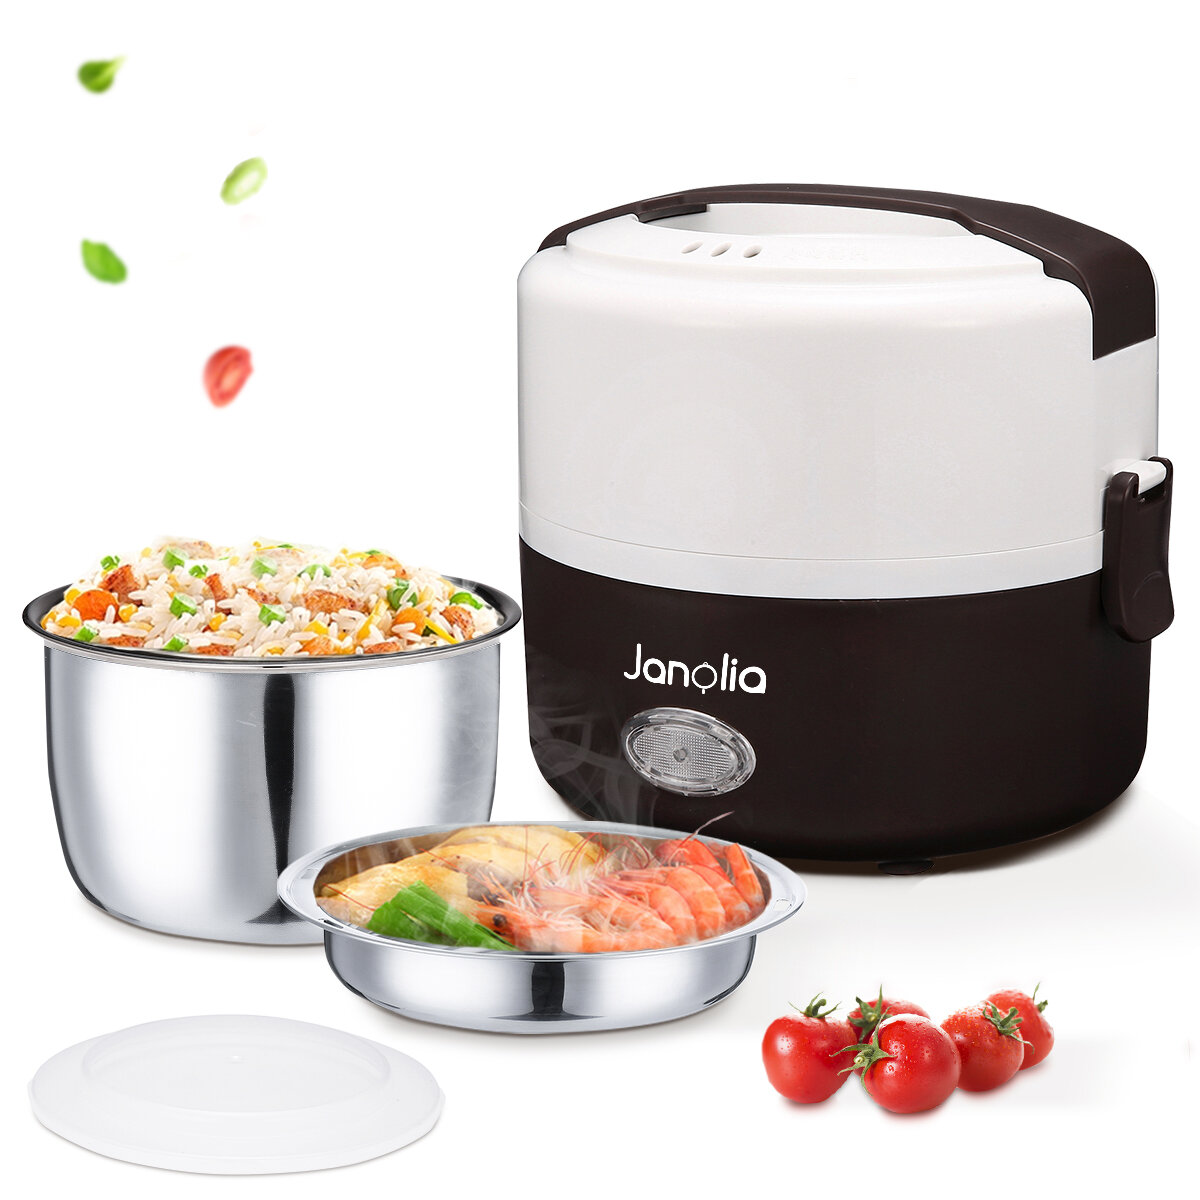 

Janolia 1.3L 200W Portable Electric Lunch Box Food Warmer with Removable Stainless Steel Container Electric Heating Bent